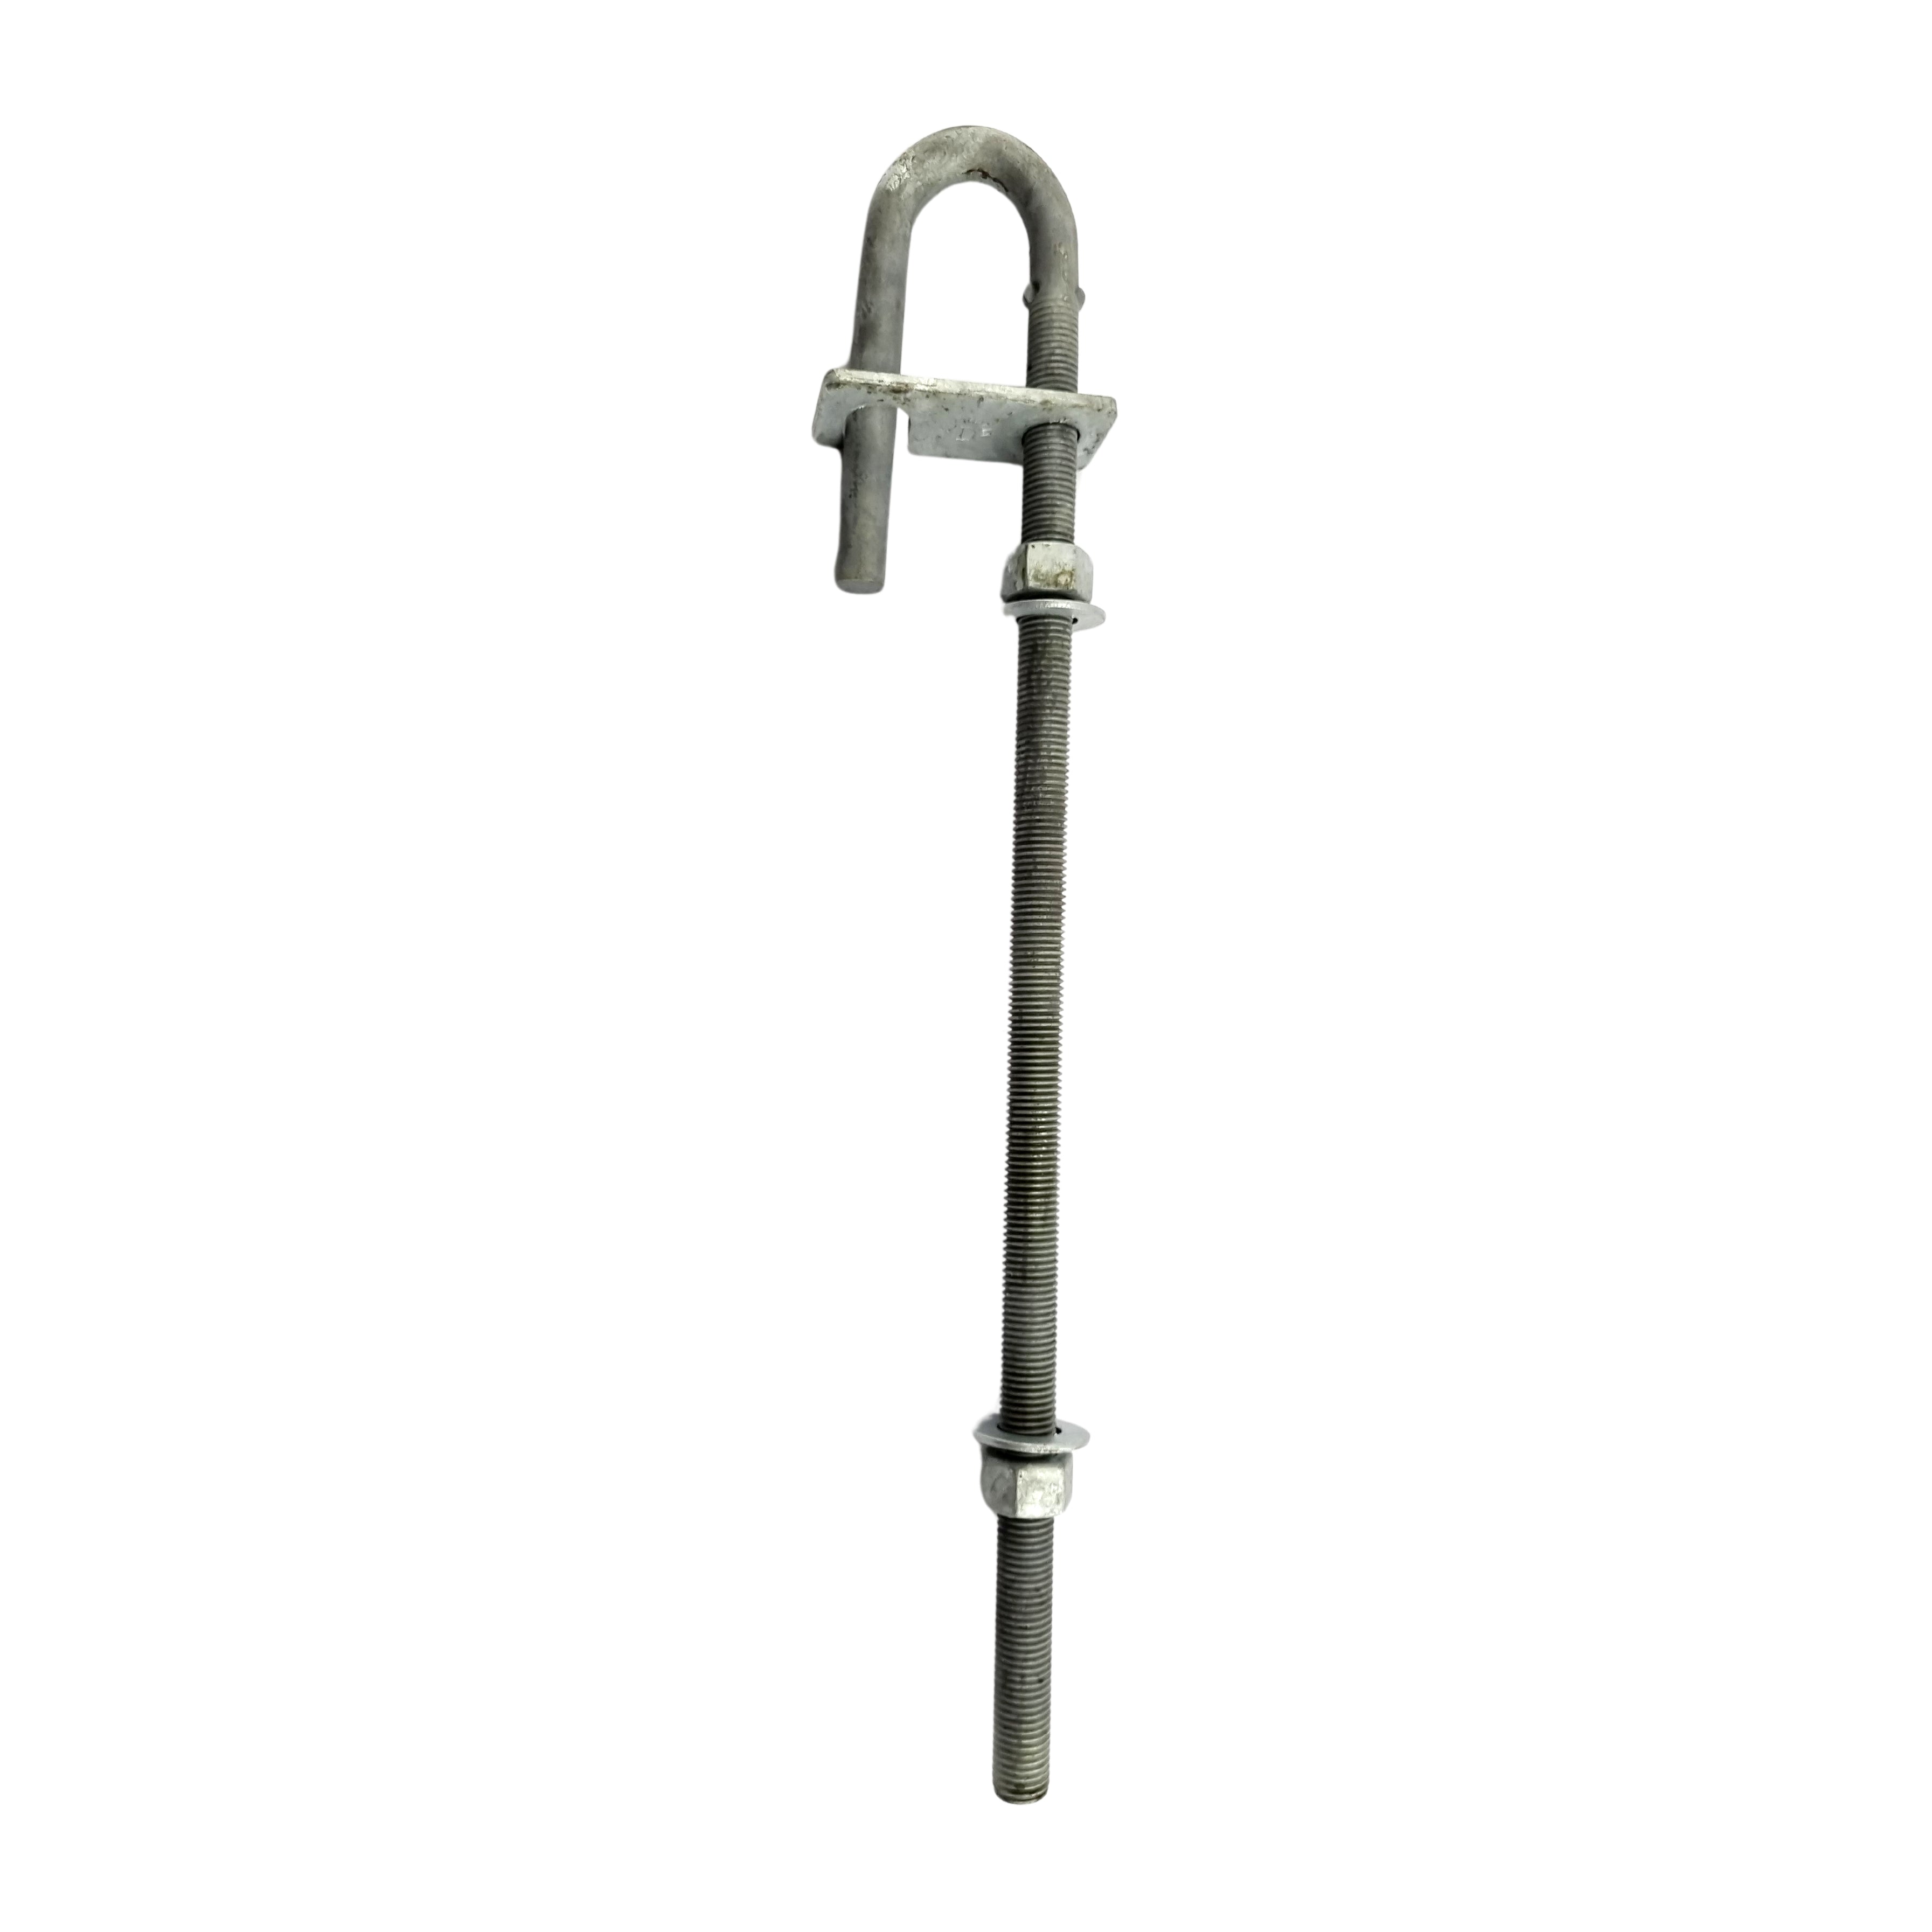 Timber Post Strap - Bolt Thru - Type C - Galvanised. Australian Made. Fence & Gate Fittings. Shop online chain.com.au. Australia wide shipping.